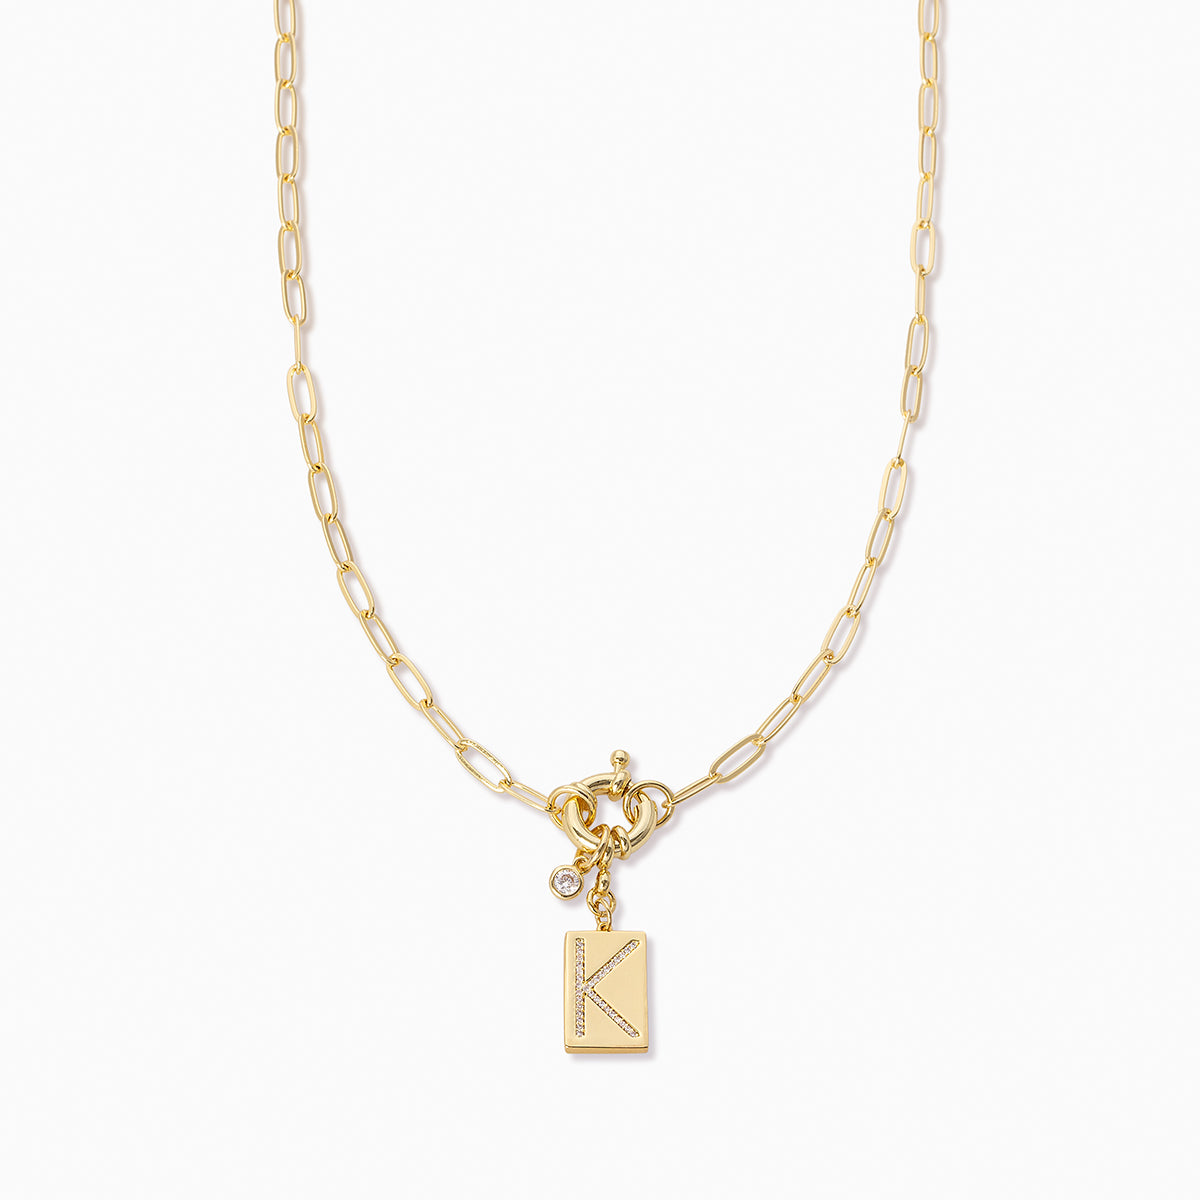 Gold Initial Necklaces Gifts for Men, Gold Plated Letter M Pendant Initial  Necklace for Men Women